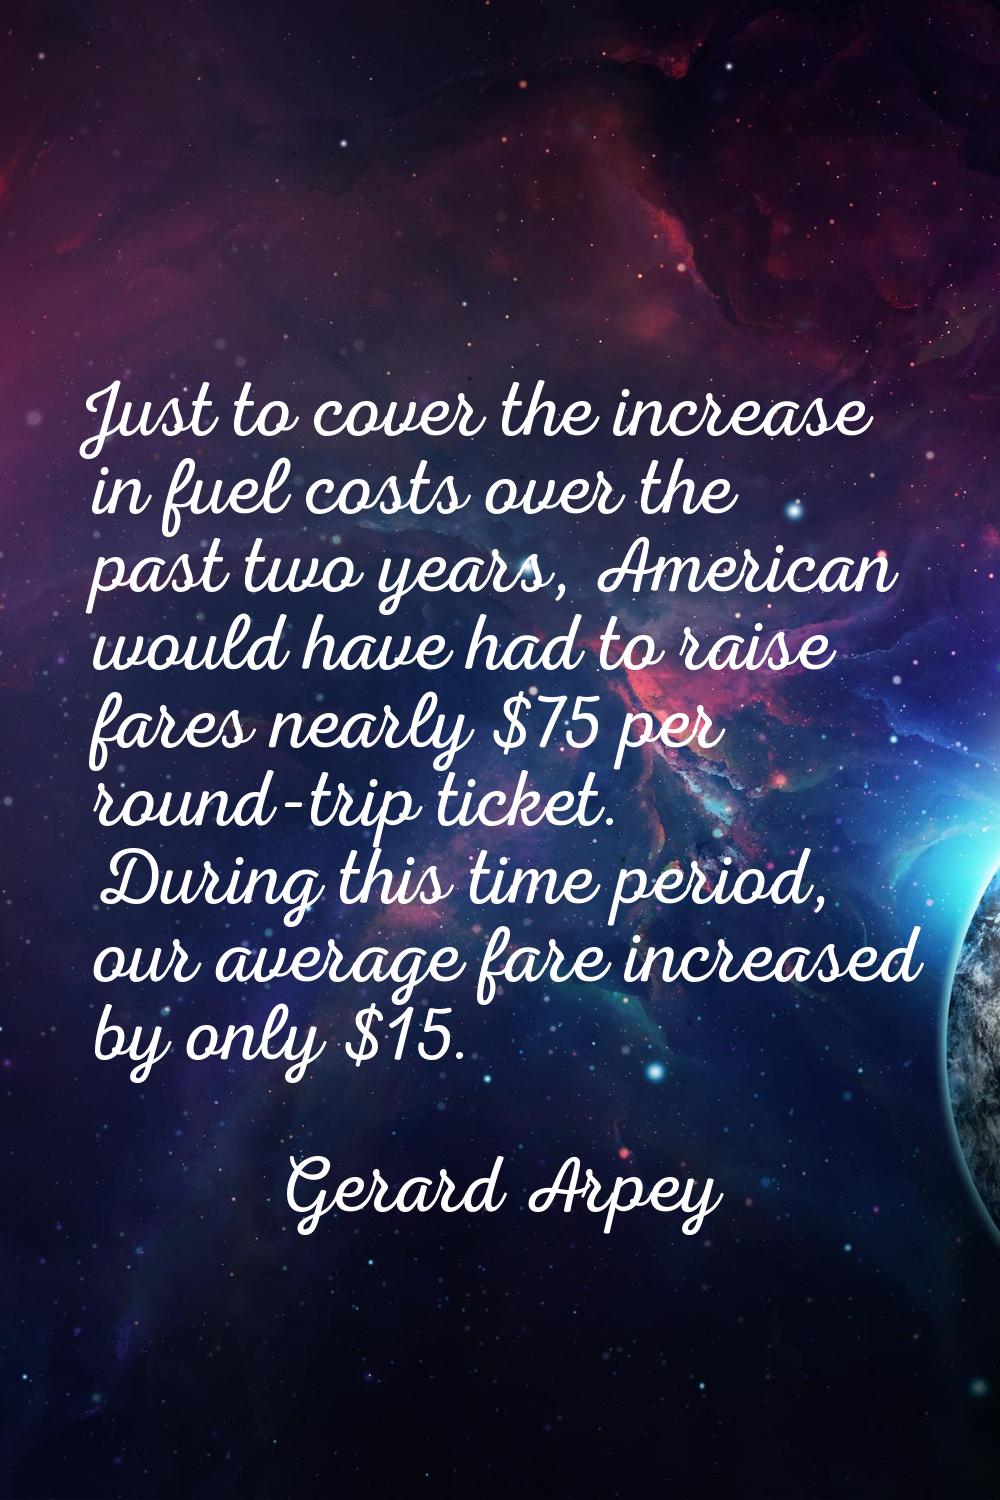 Just to cover the increase in fuel costs over the past two years, American would have had to raise 